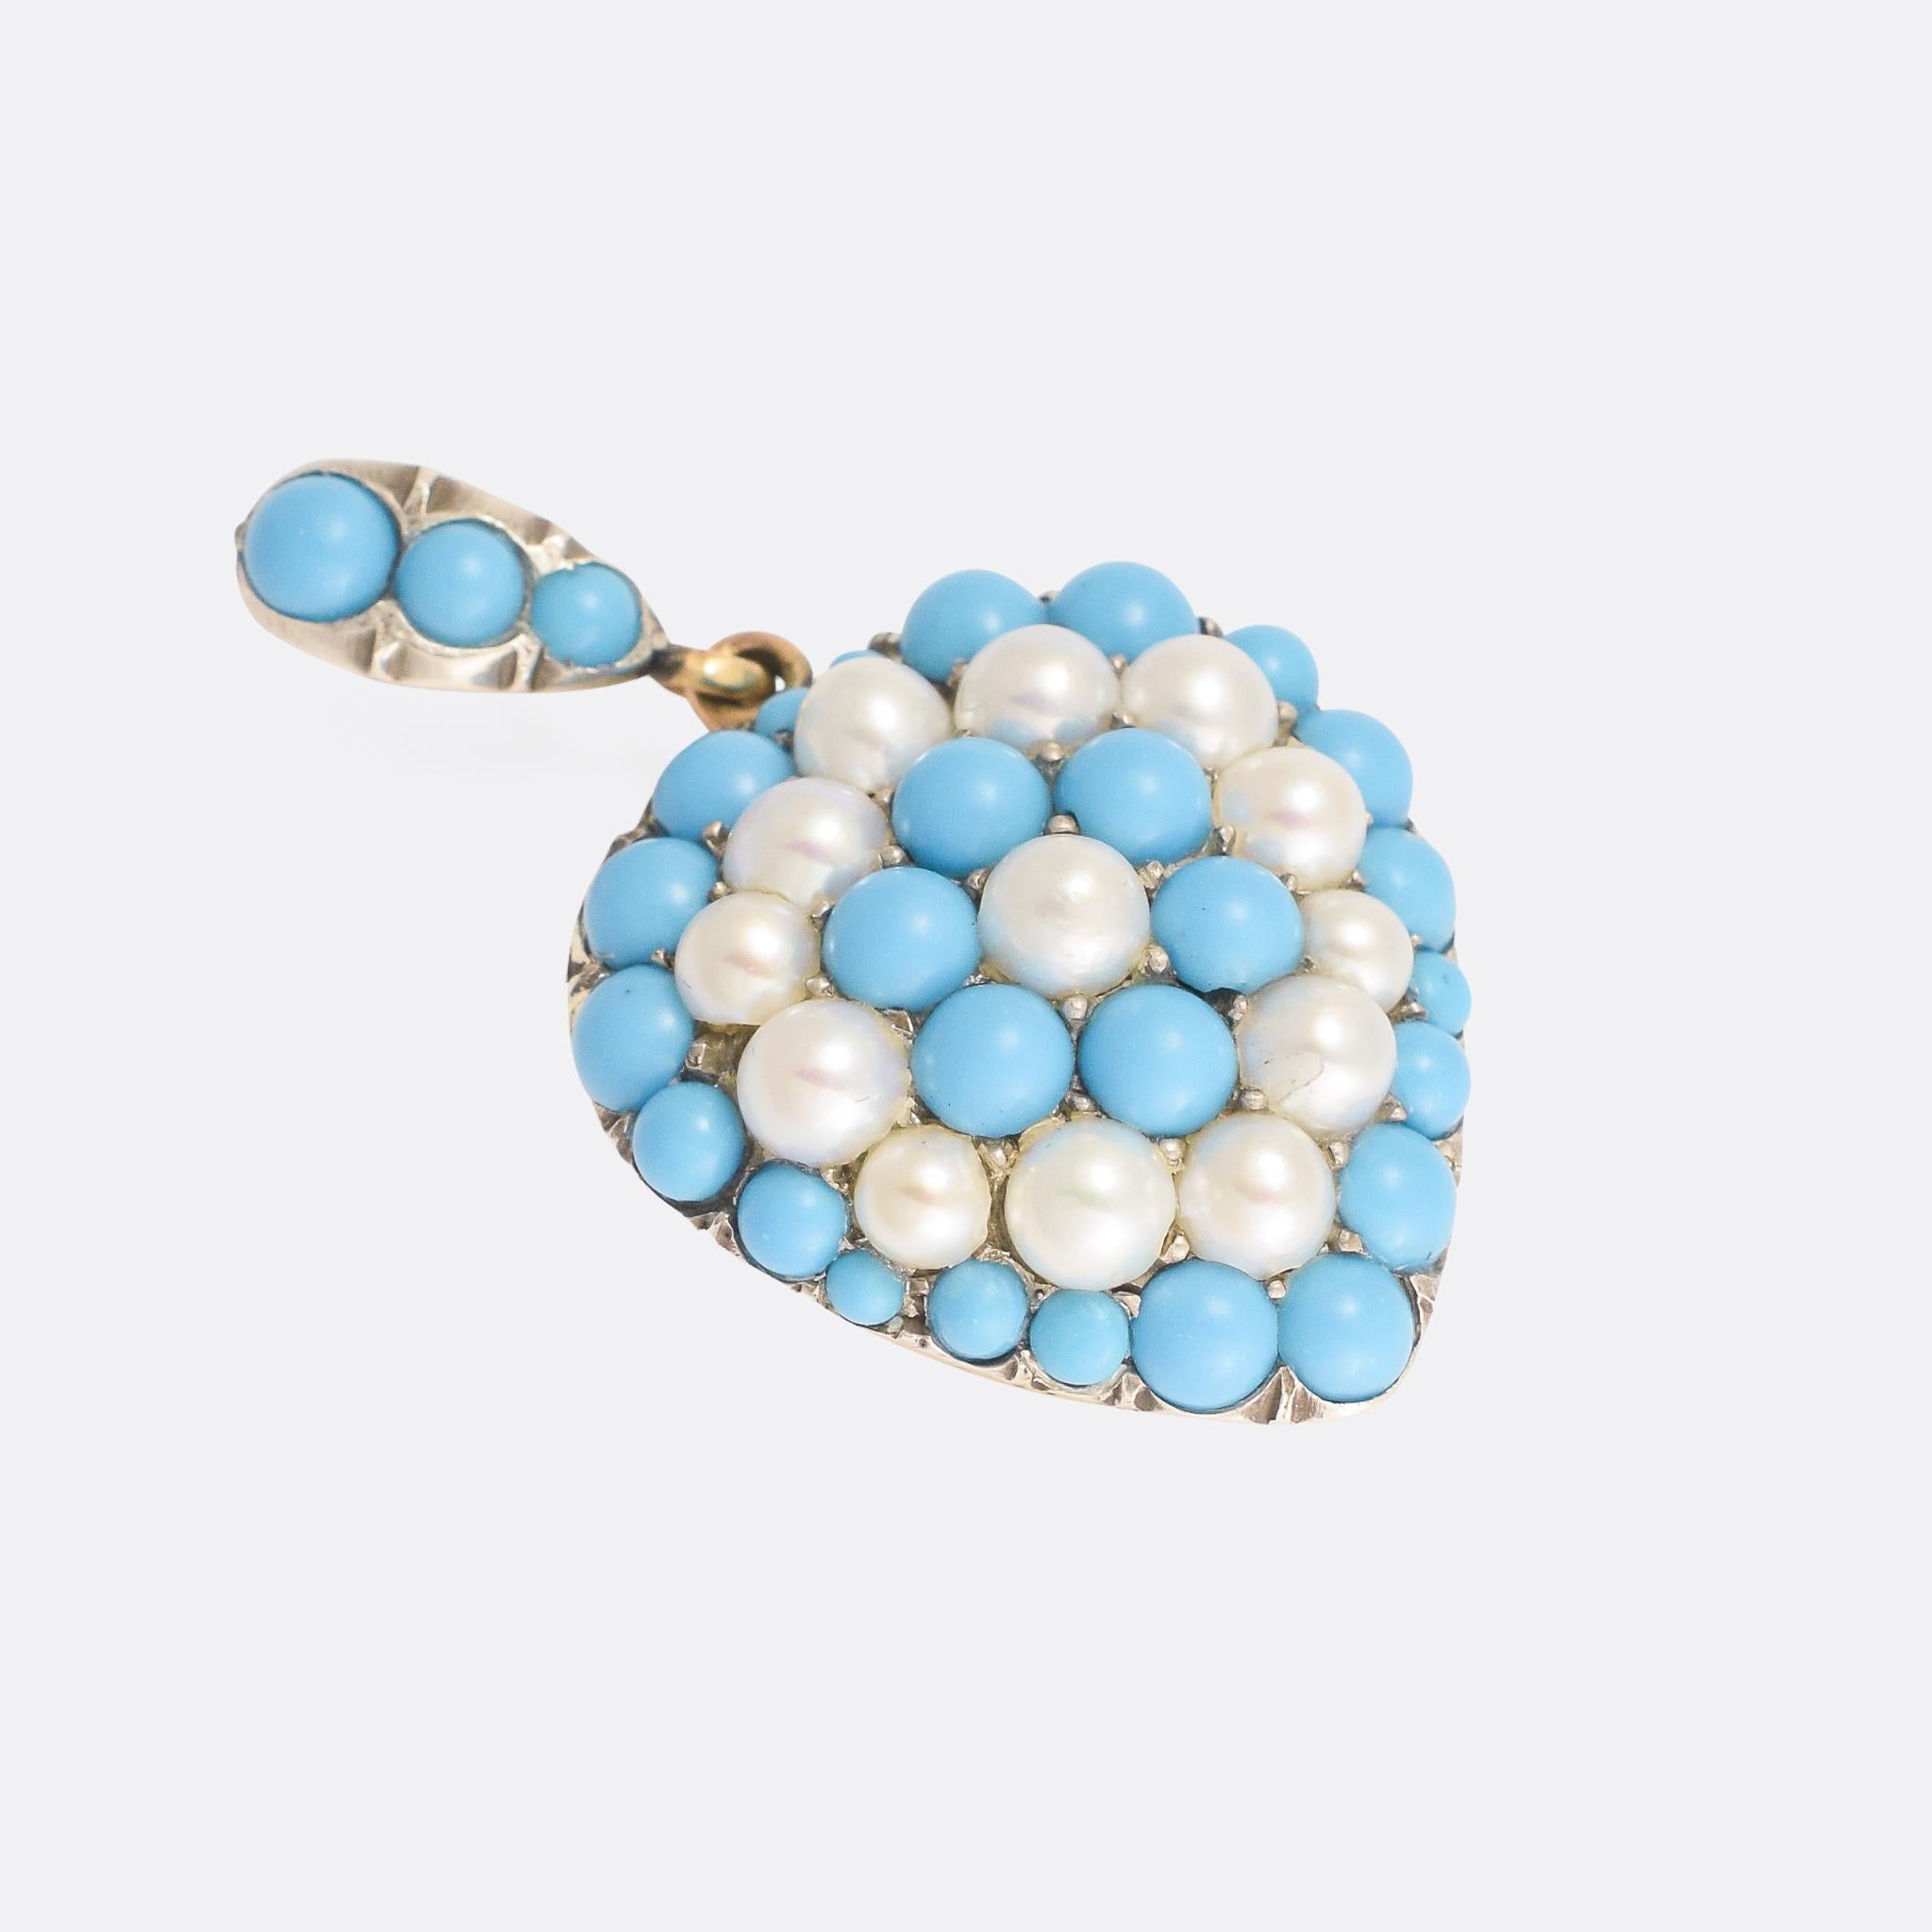 A particularly lovely Victorian puffed heart pendant, fully pavé set with alternating rings of vibrant Persian turquoise and natural pearls. It's modelled in 15k yellow gold with silver settings, and dates from the late 19th Century - circa 1880.